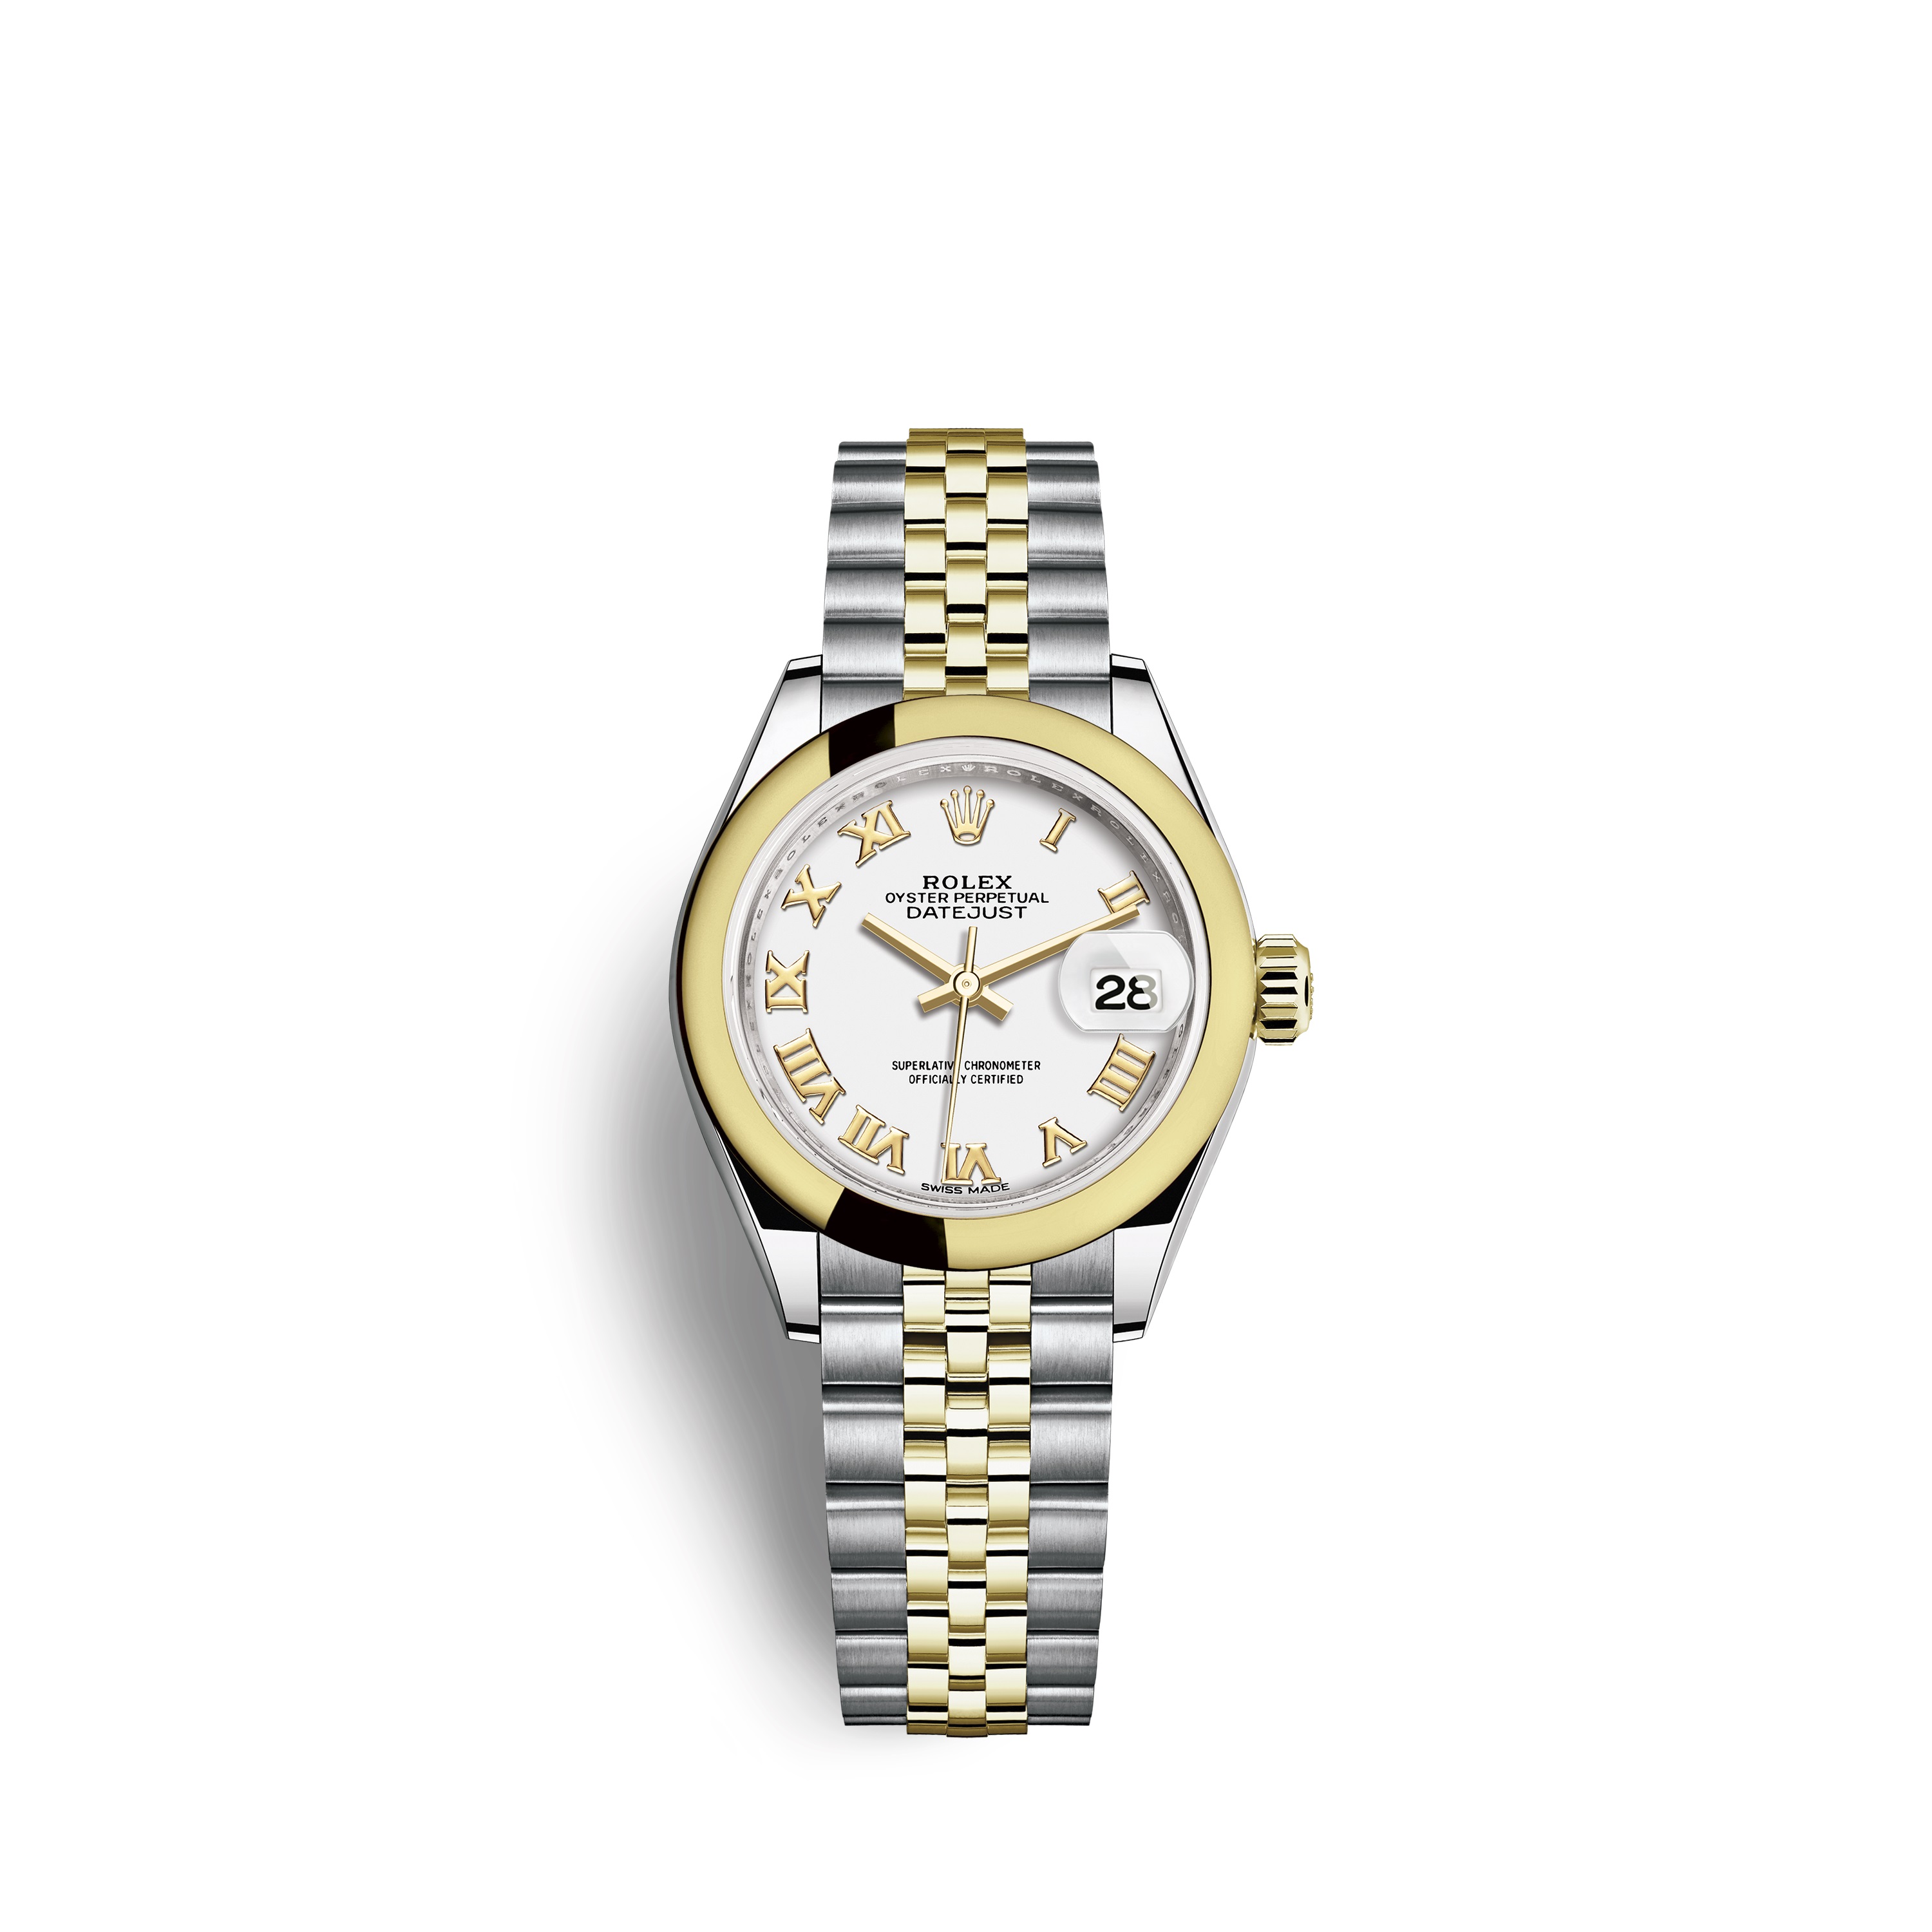 Lady-Datejust 28 279163 Gold & Stainless Steel Watch (White)